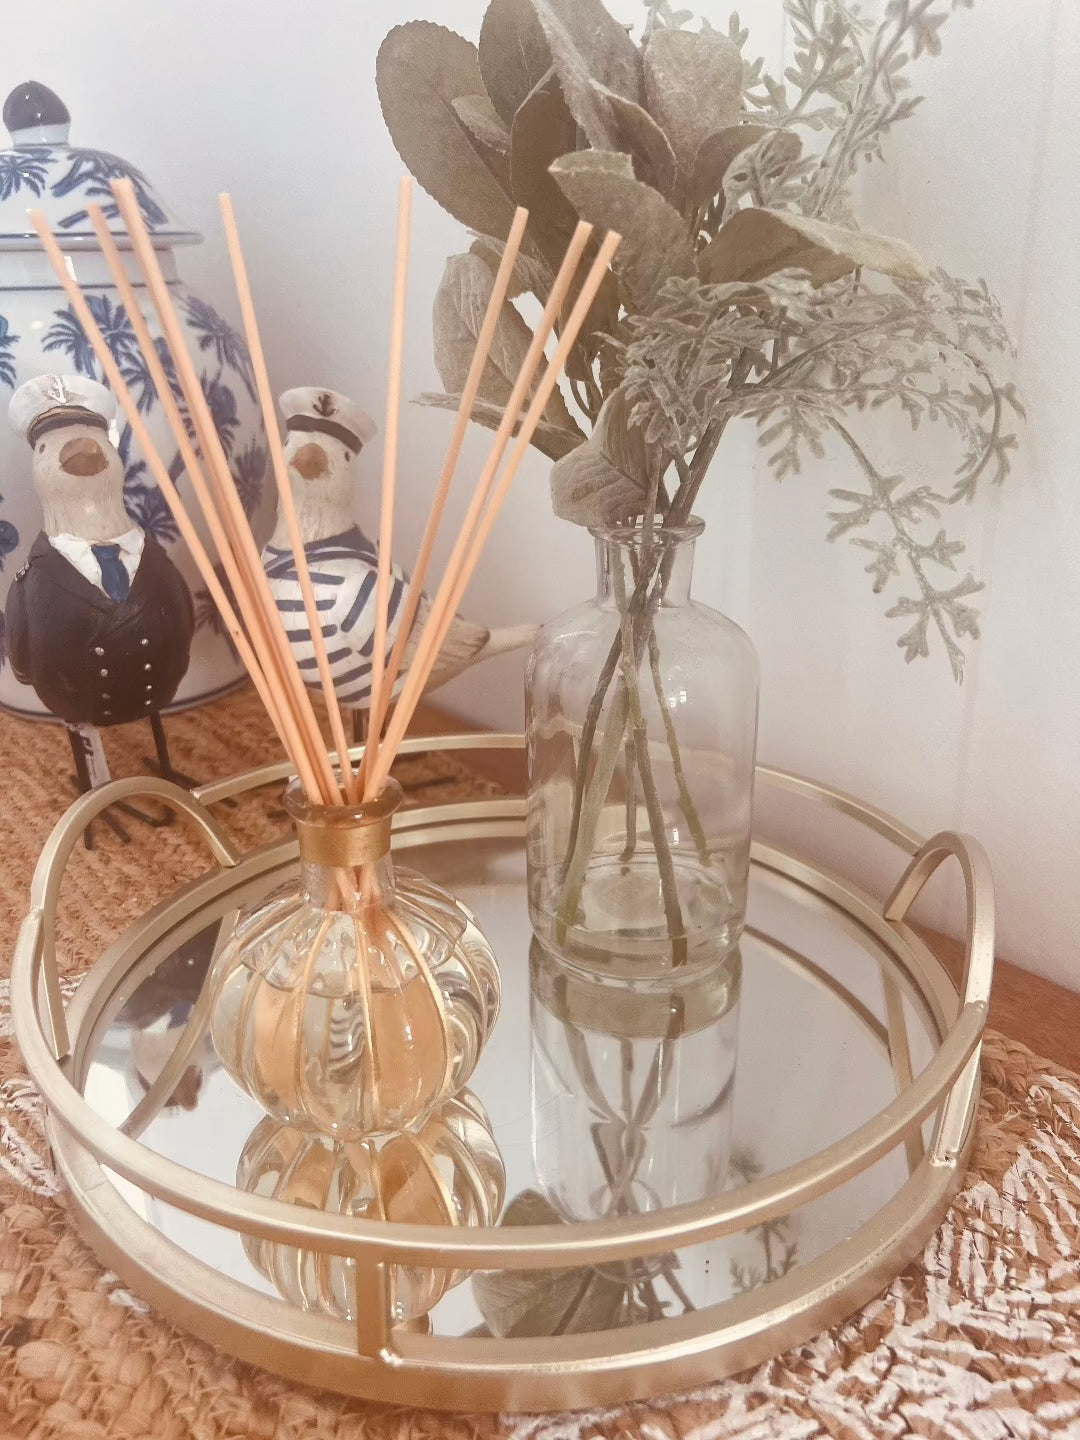 Create You Own Reed Diffuser